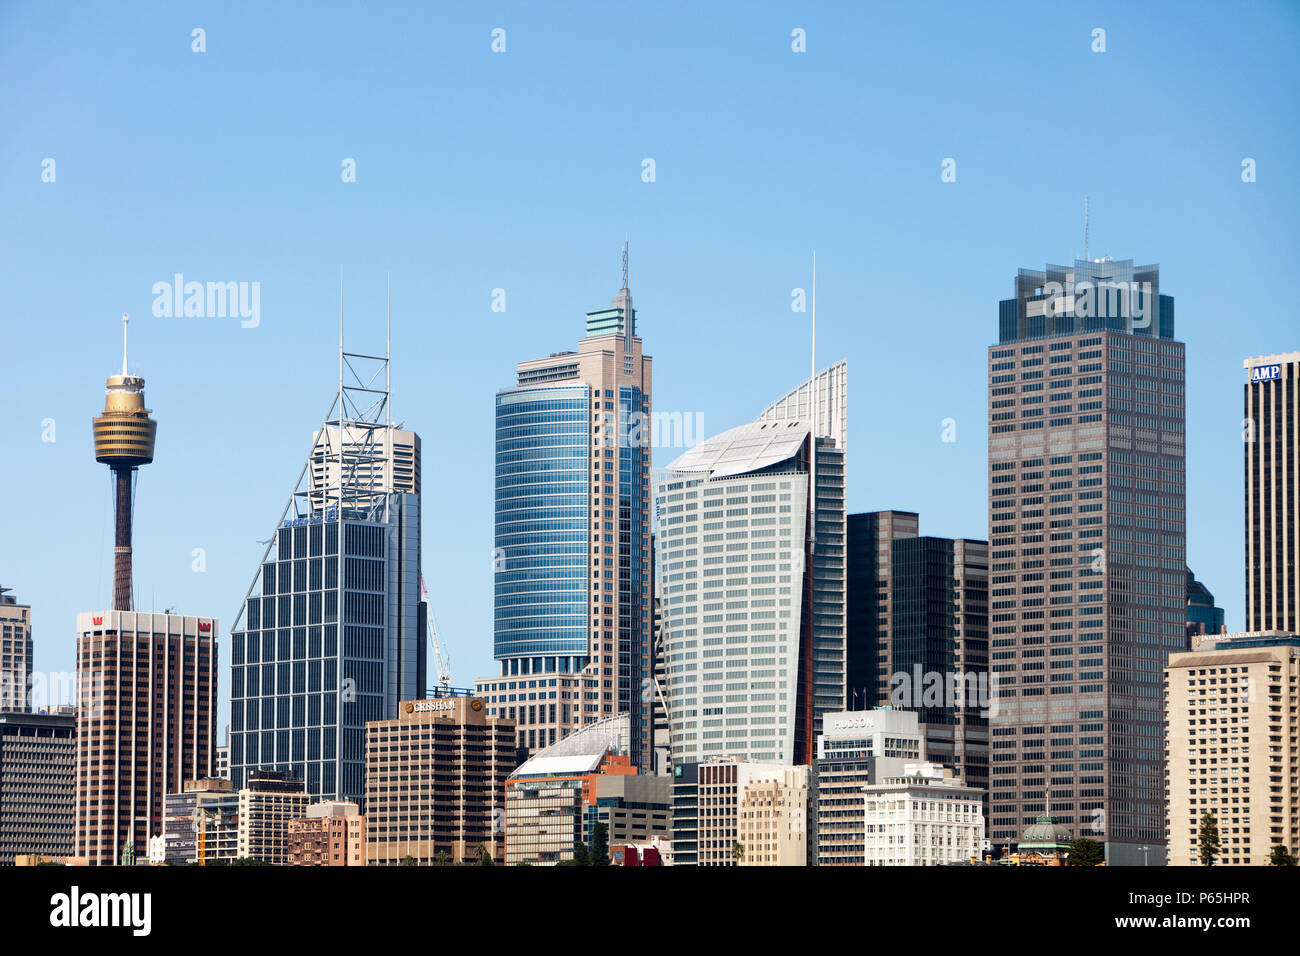 The Central Business District of Sydney, Australia. Stock Photo